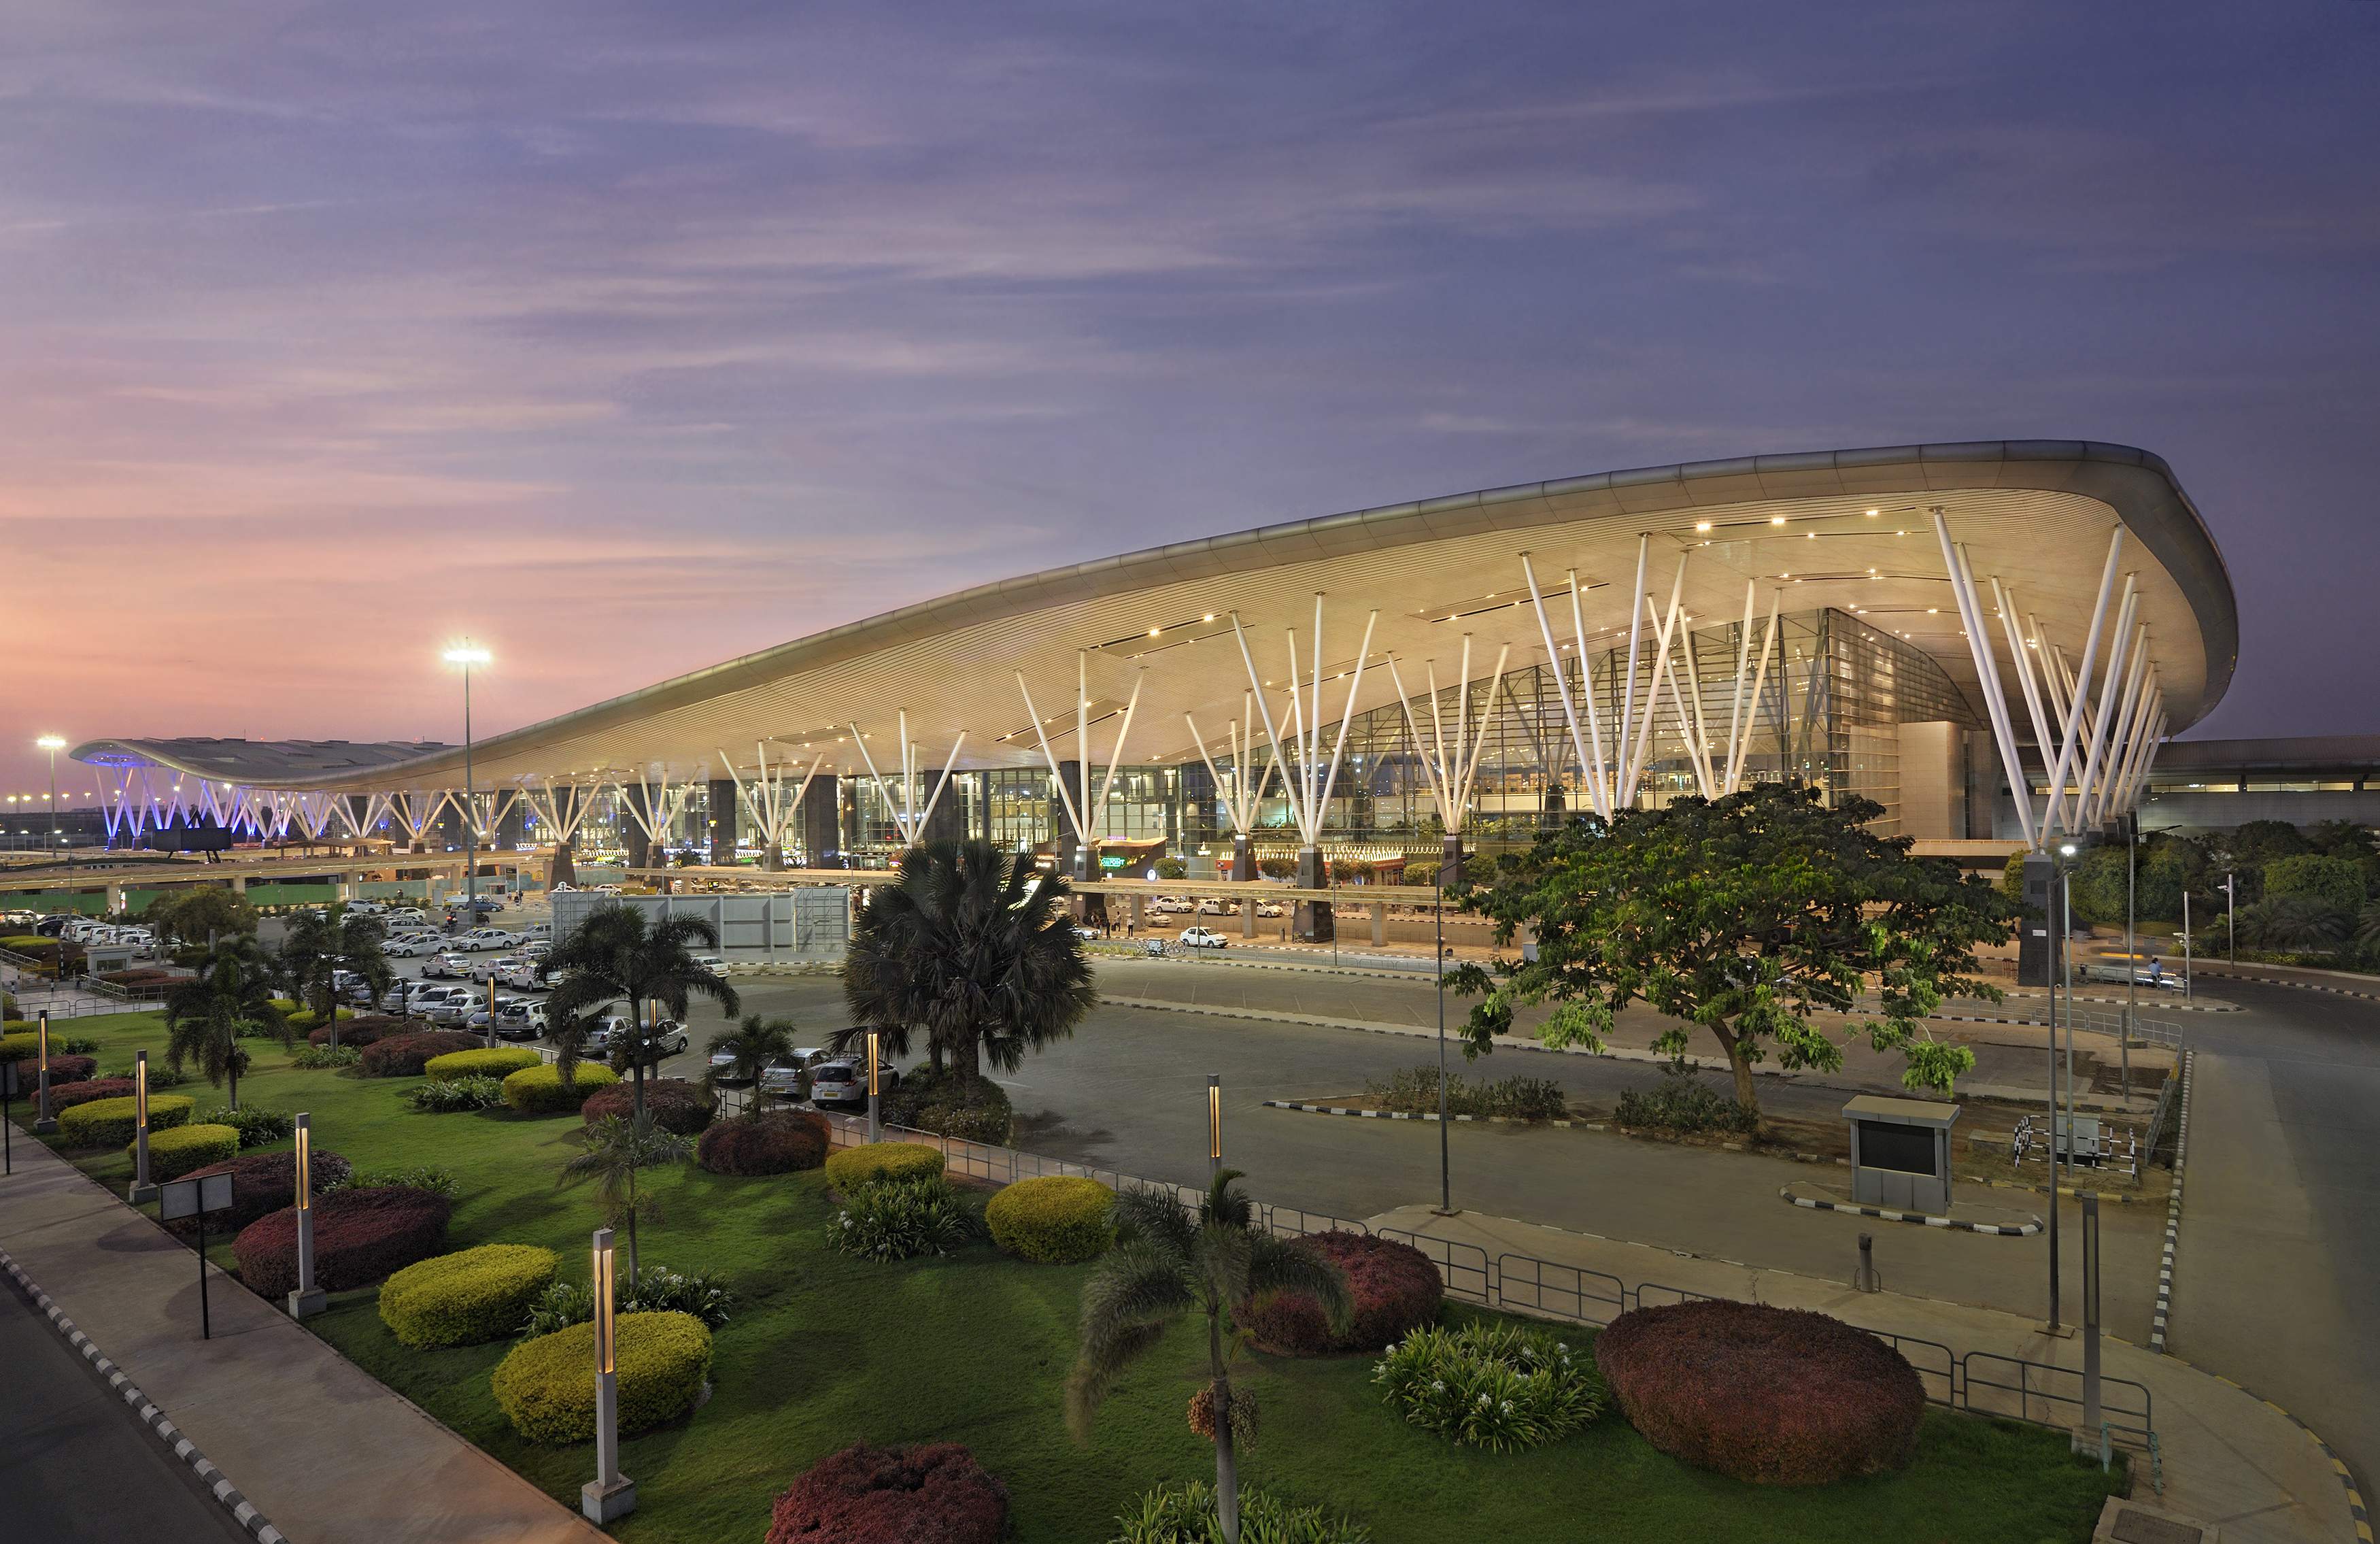 Bengaluru Airport Voted as best regional airport in India & Central Asia